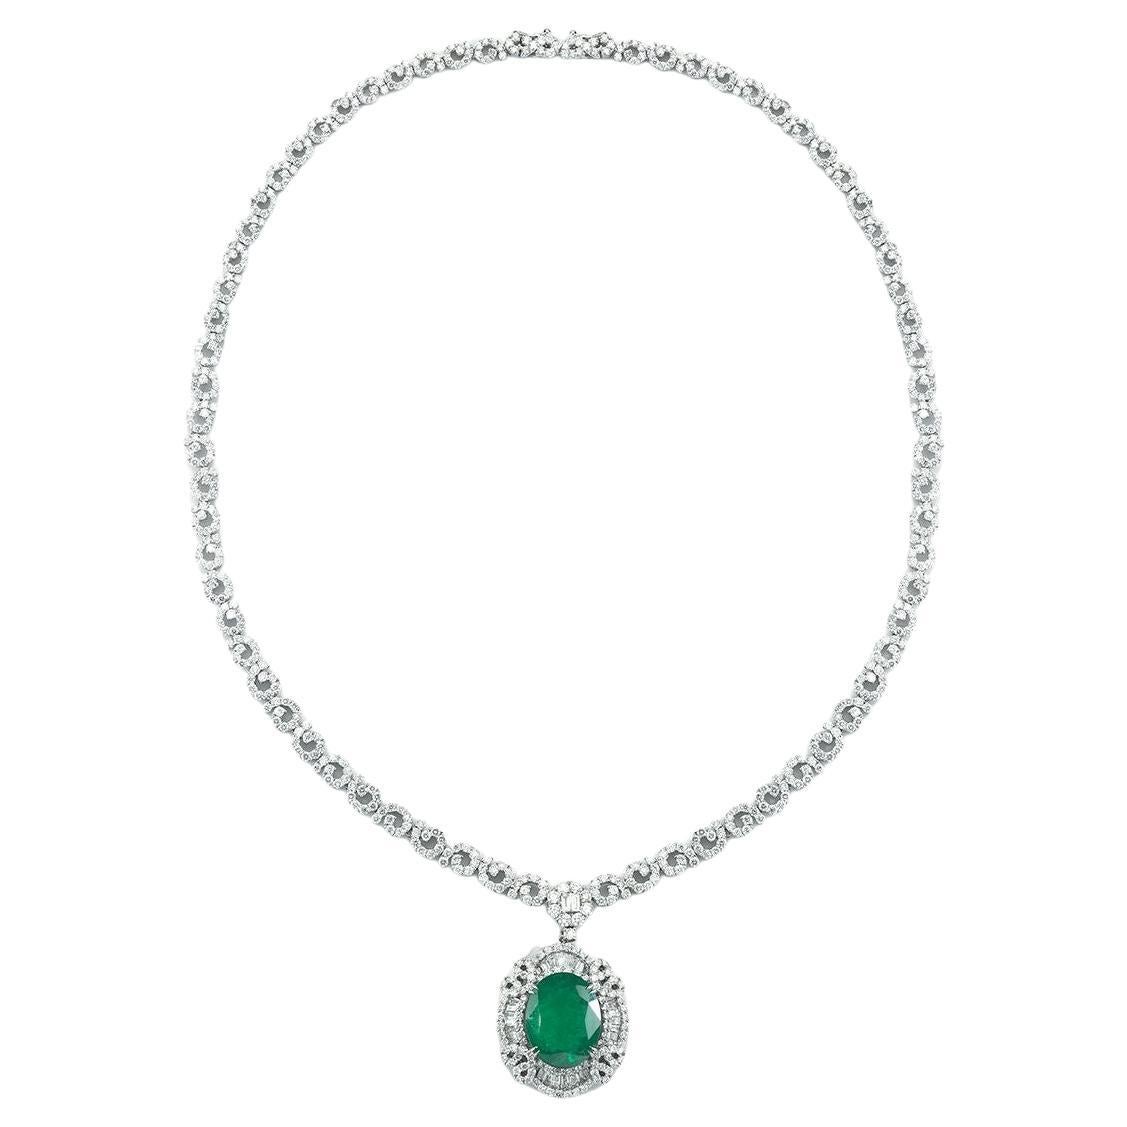 18k White Gold 8.91ct Emerald And 11.71ct Diamond Necklace For Sale